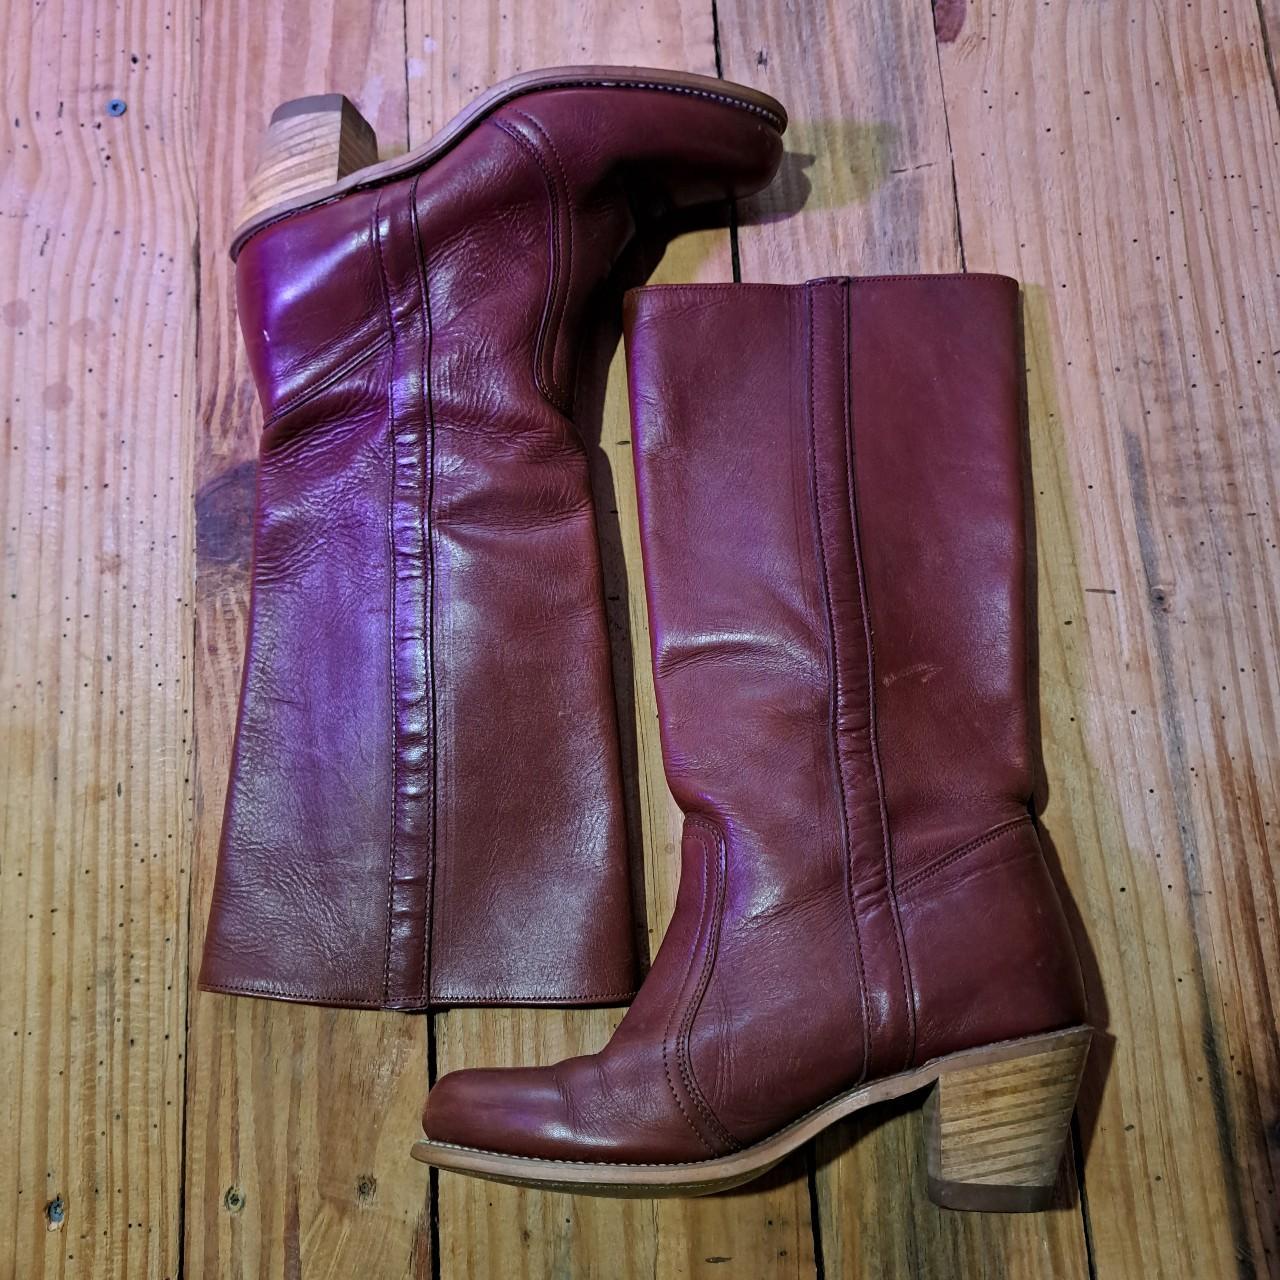 Beautiful Vintage 1970s Boots with heel Made in the... - Depop